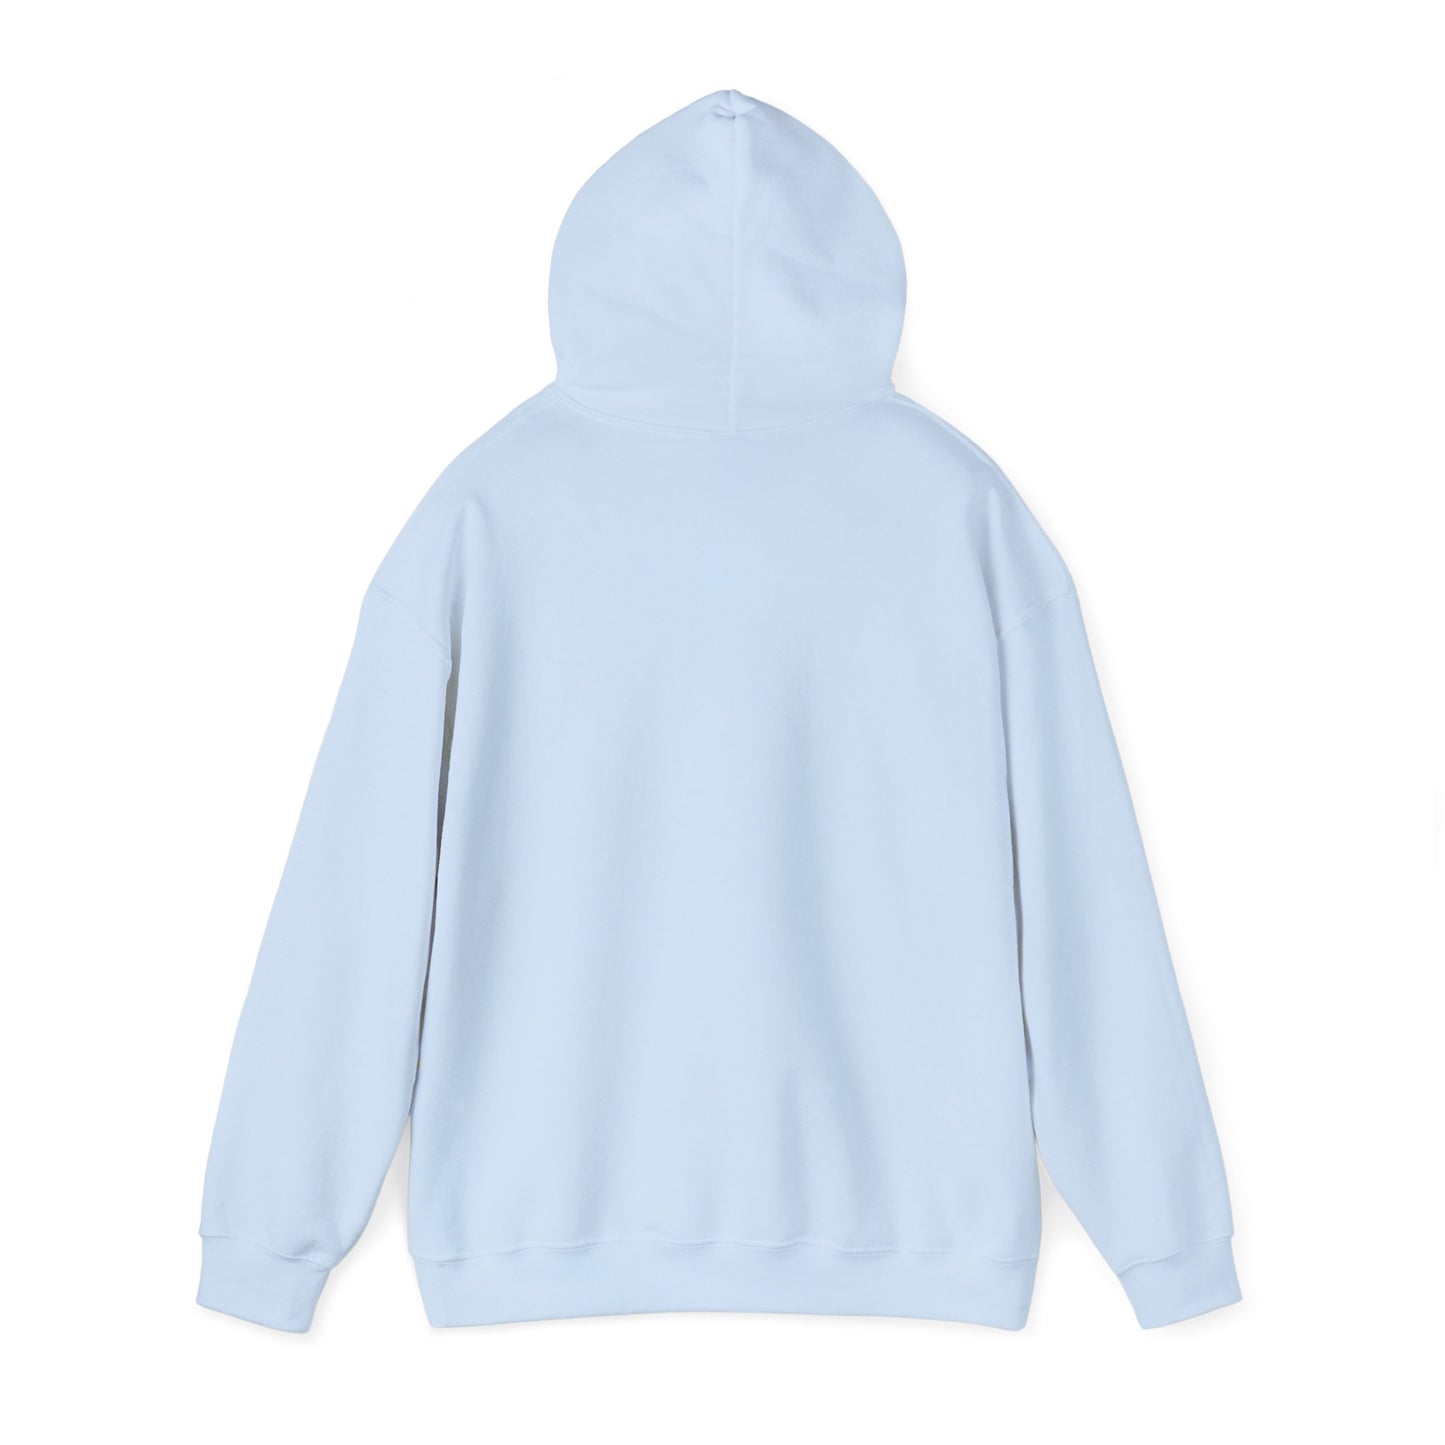 Nadia's Paige® The Silver Cure Hoodie